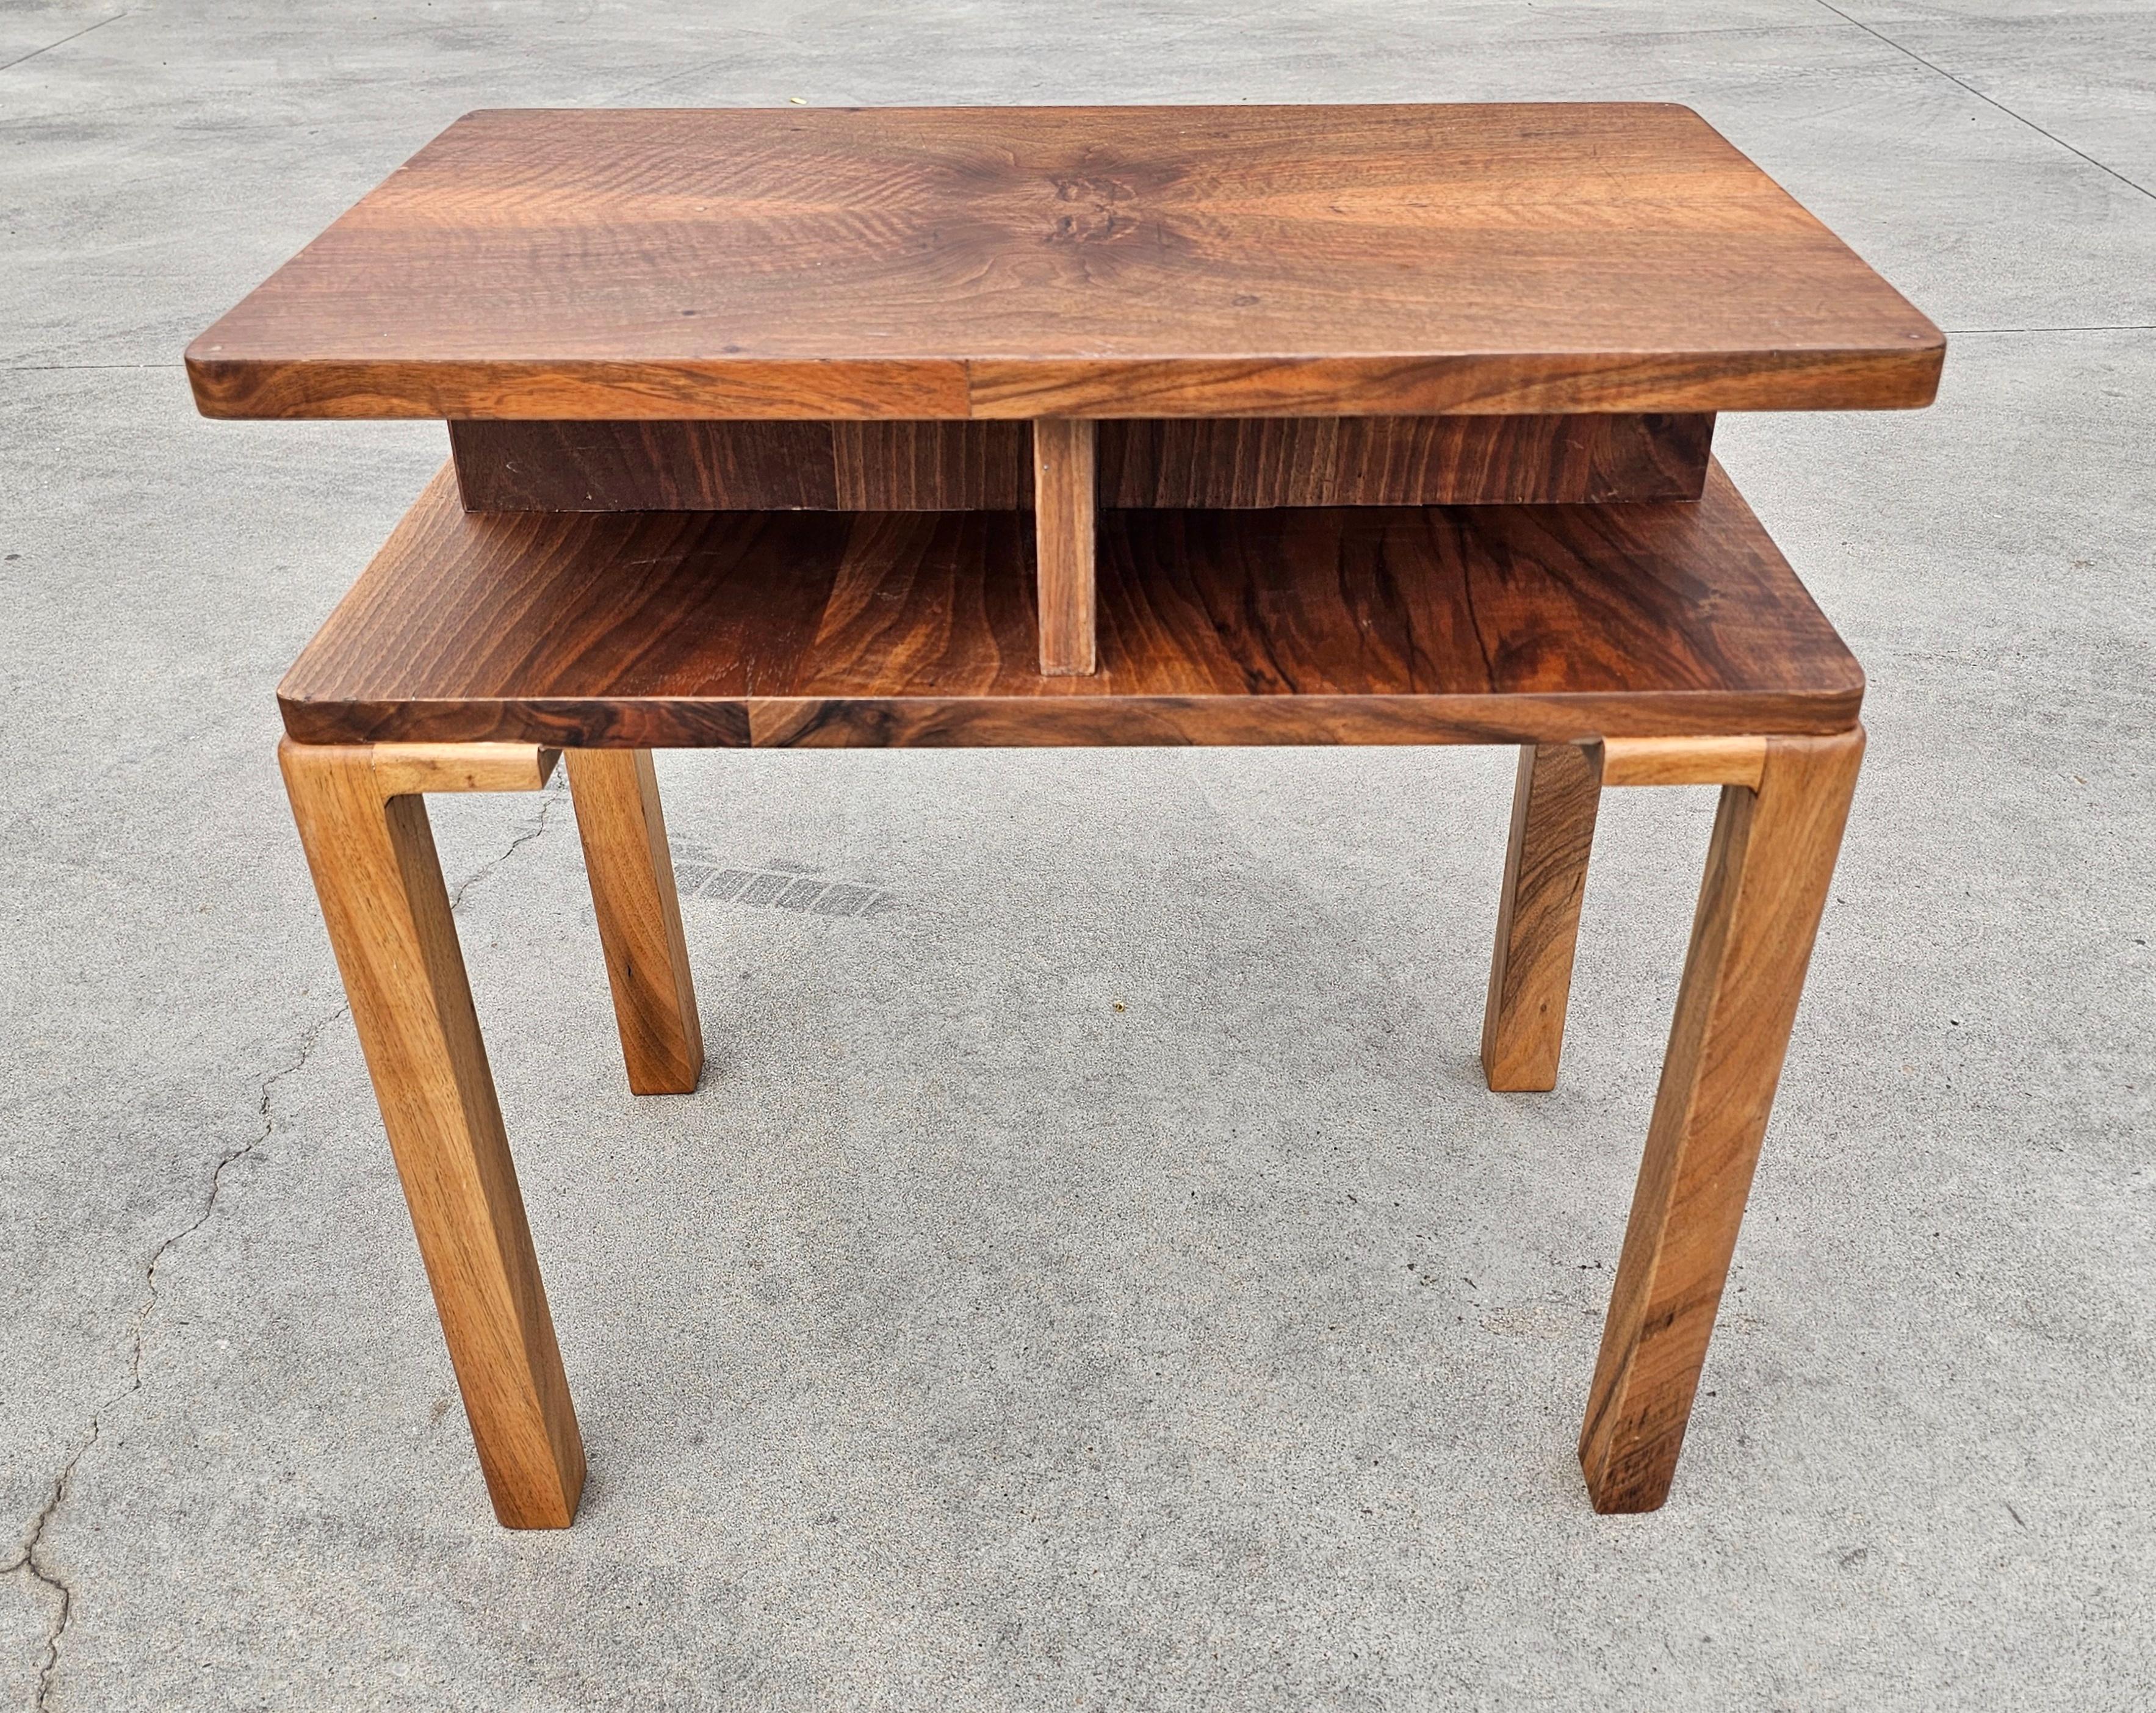 Rectangular Two Tiered Art Deco Walnut Side Table, Austria 1930s For Sale 6